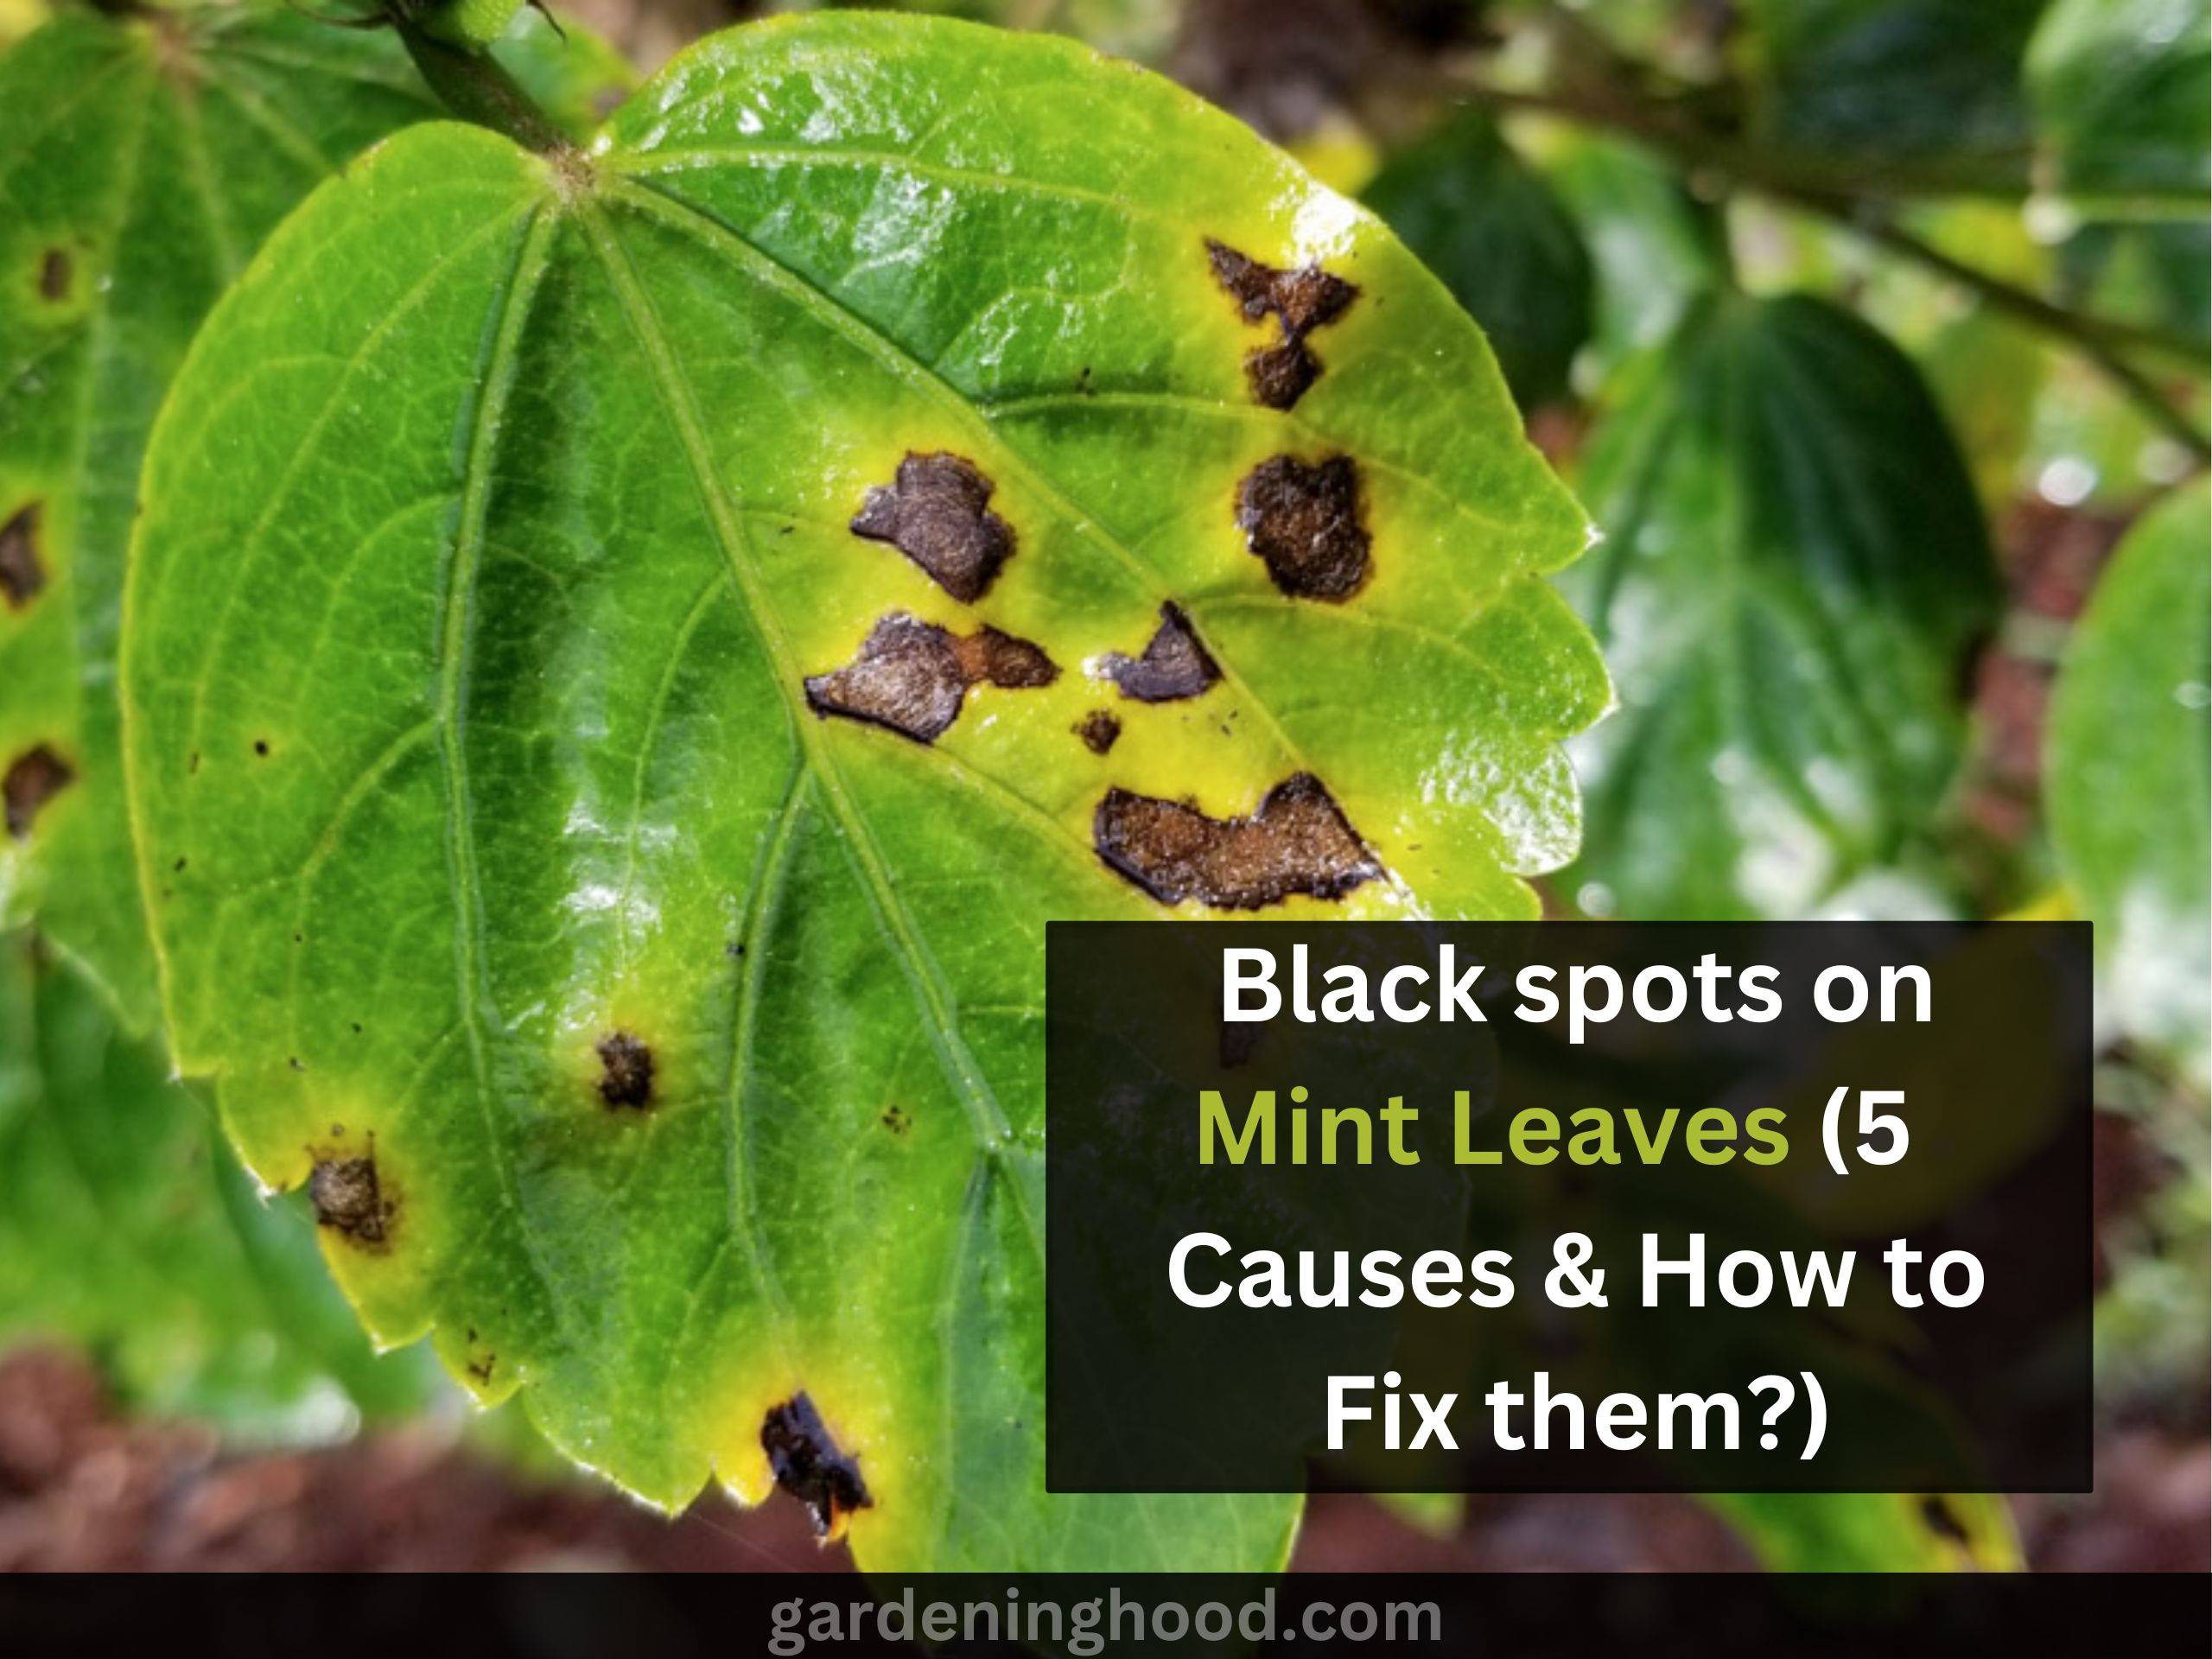 Black spots on Mint Leaves (5 Causes & How to Fix them?)